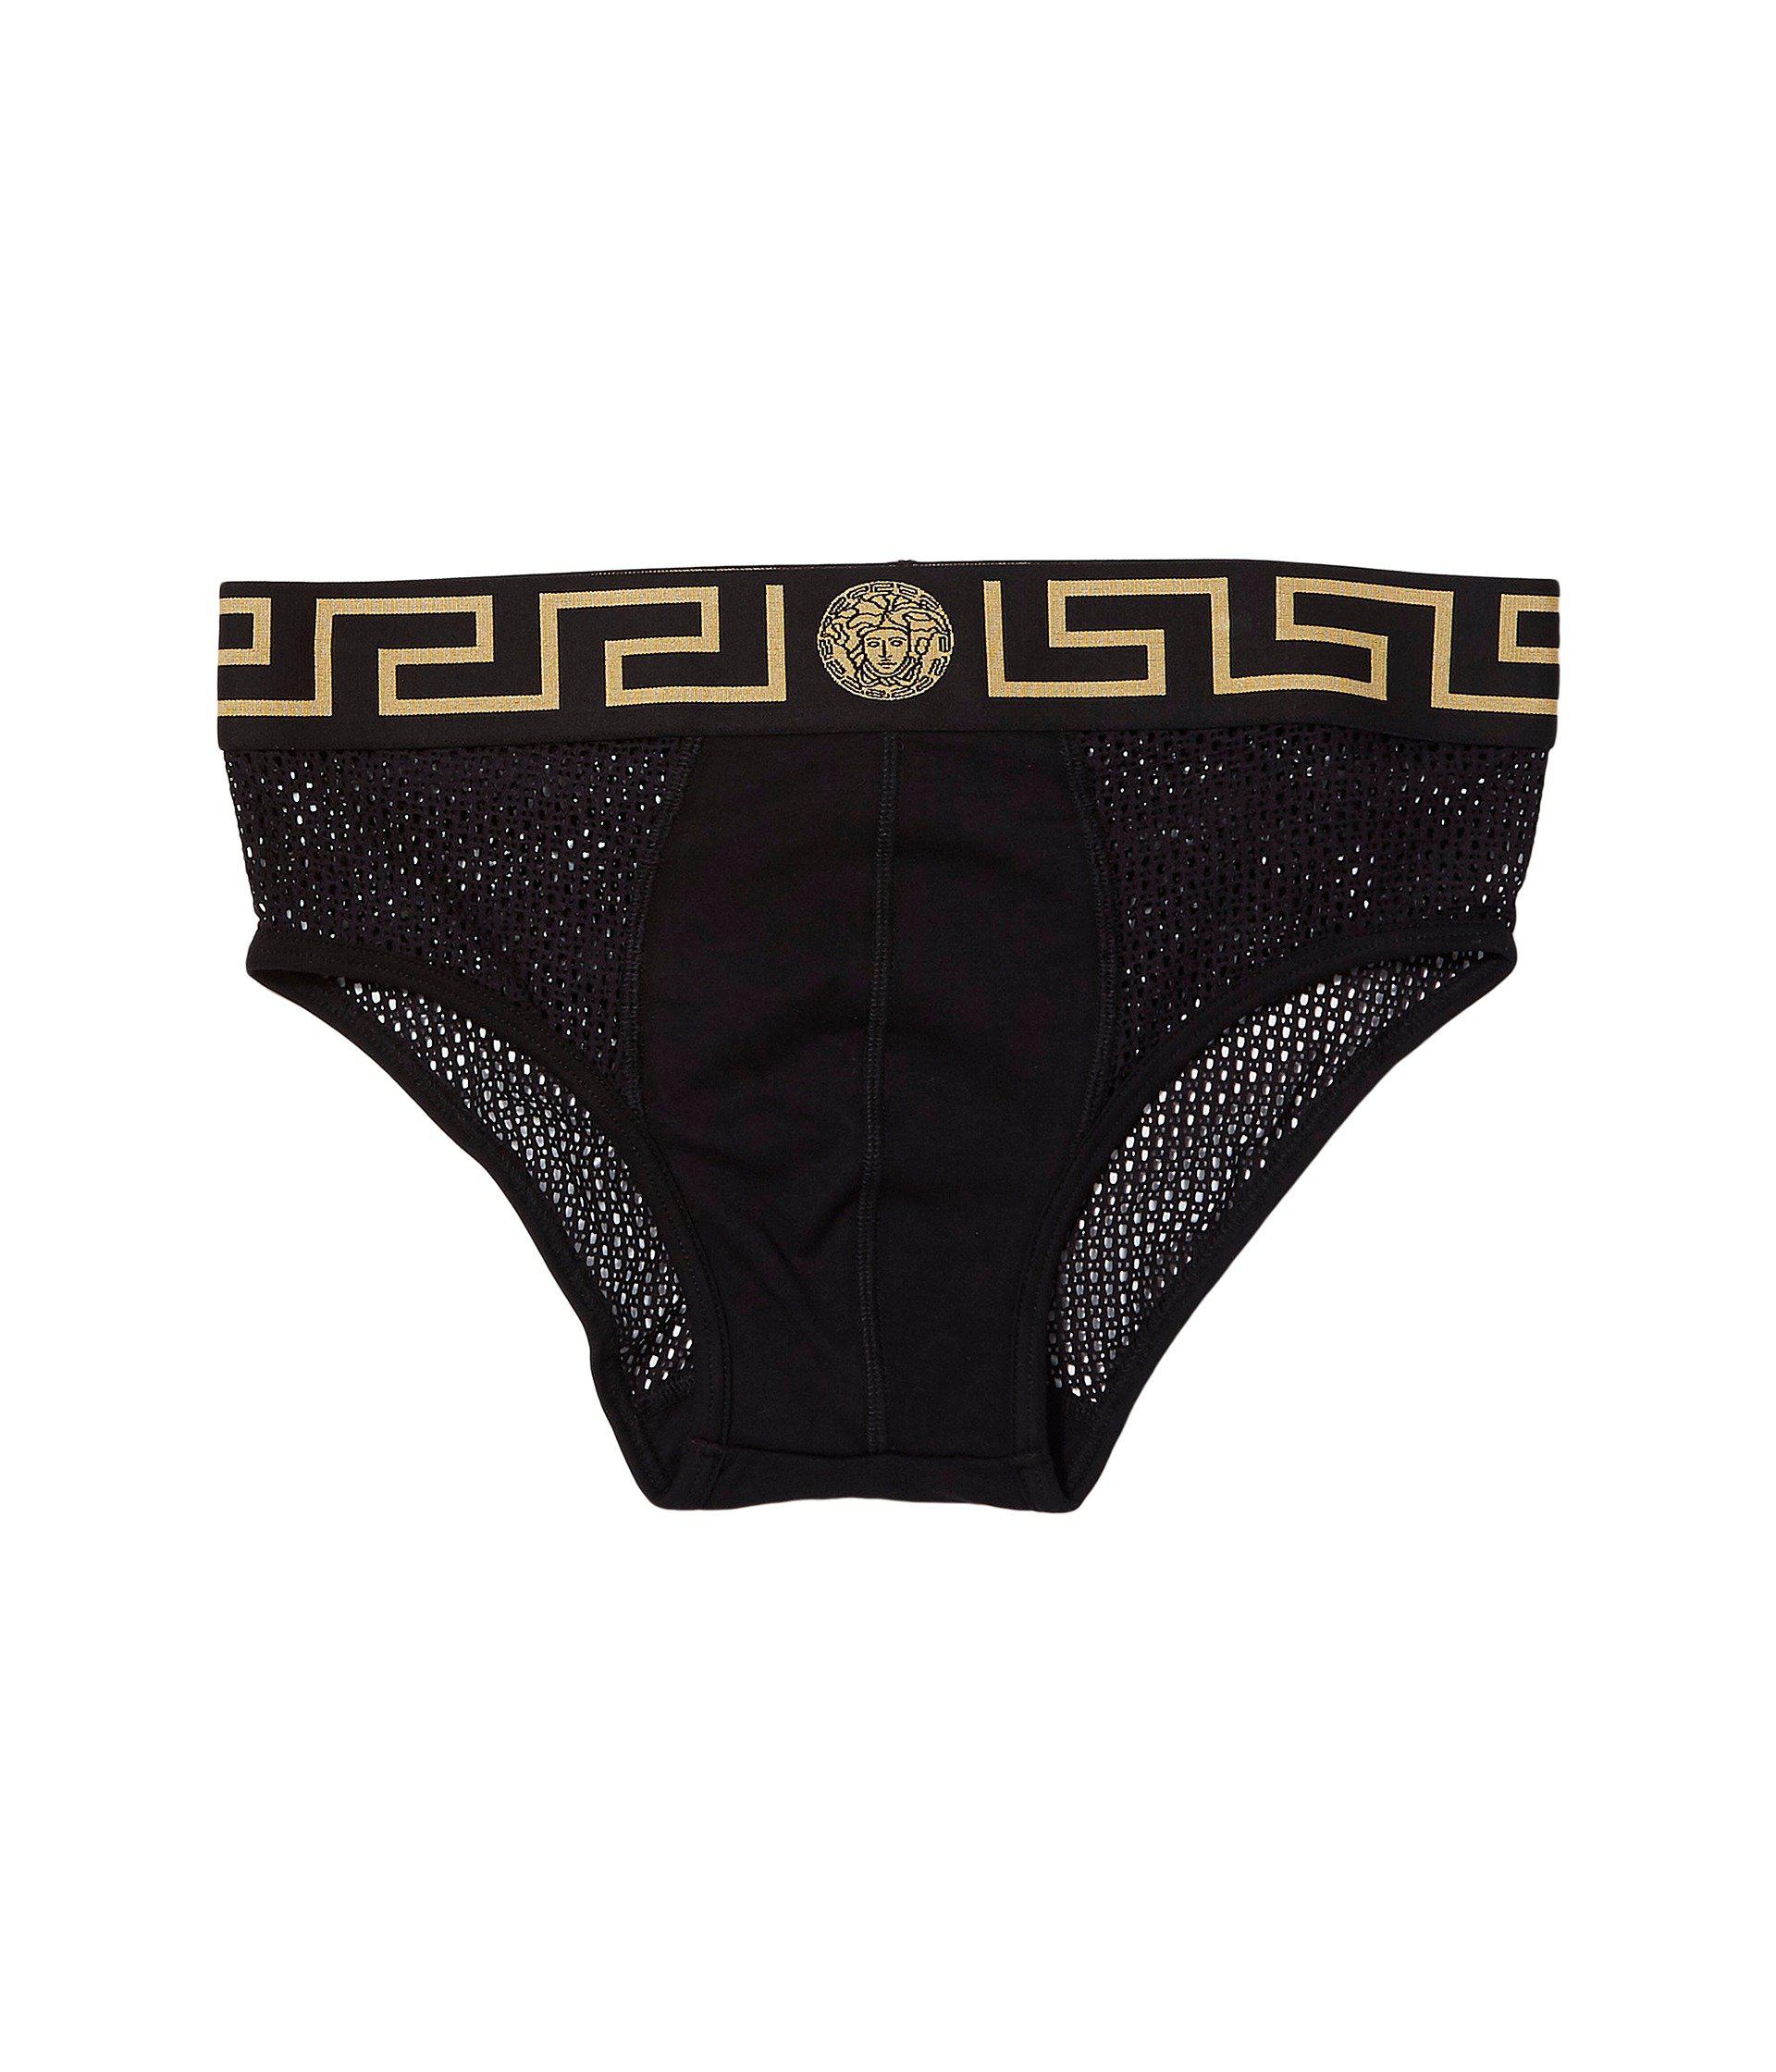 Versace Synthetic Mesh Briefs in Black for Men - Lyst